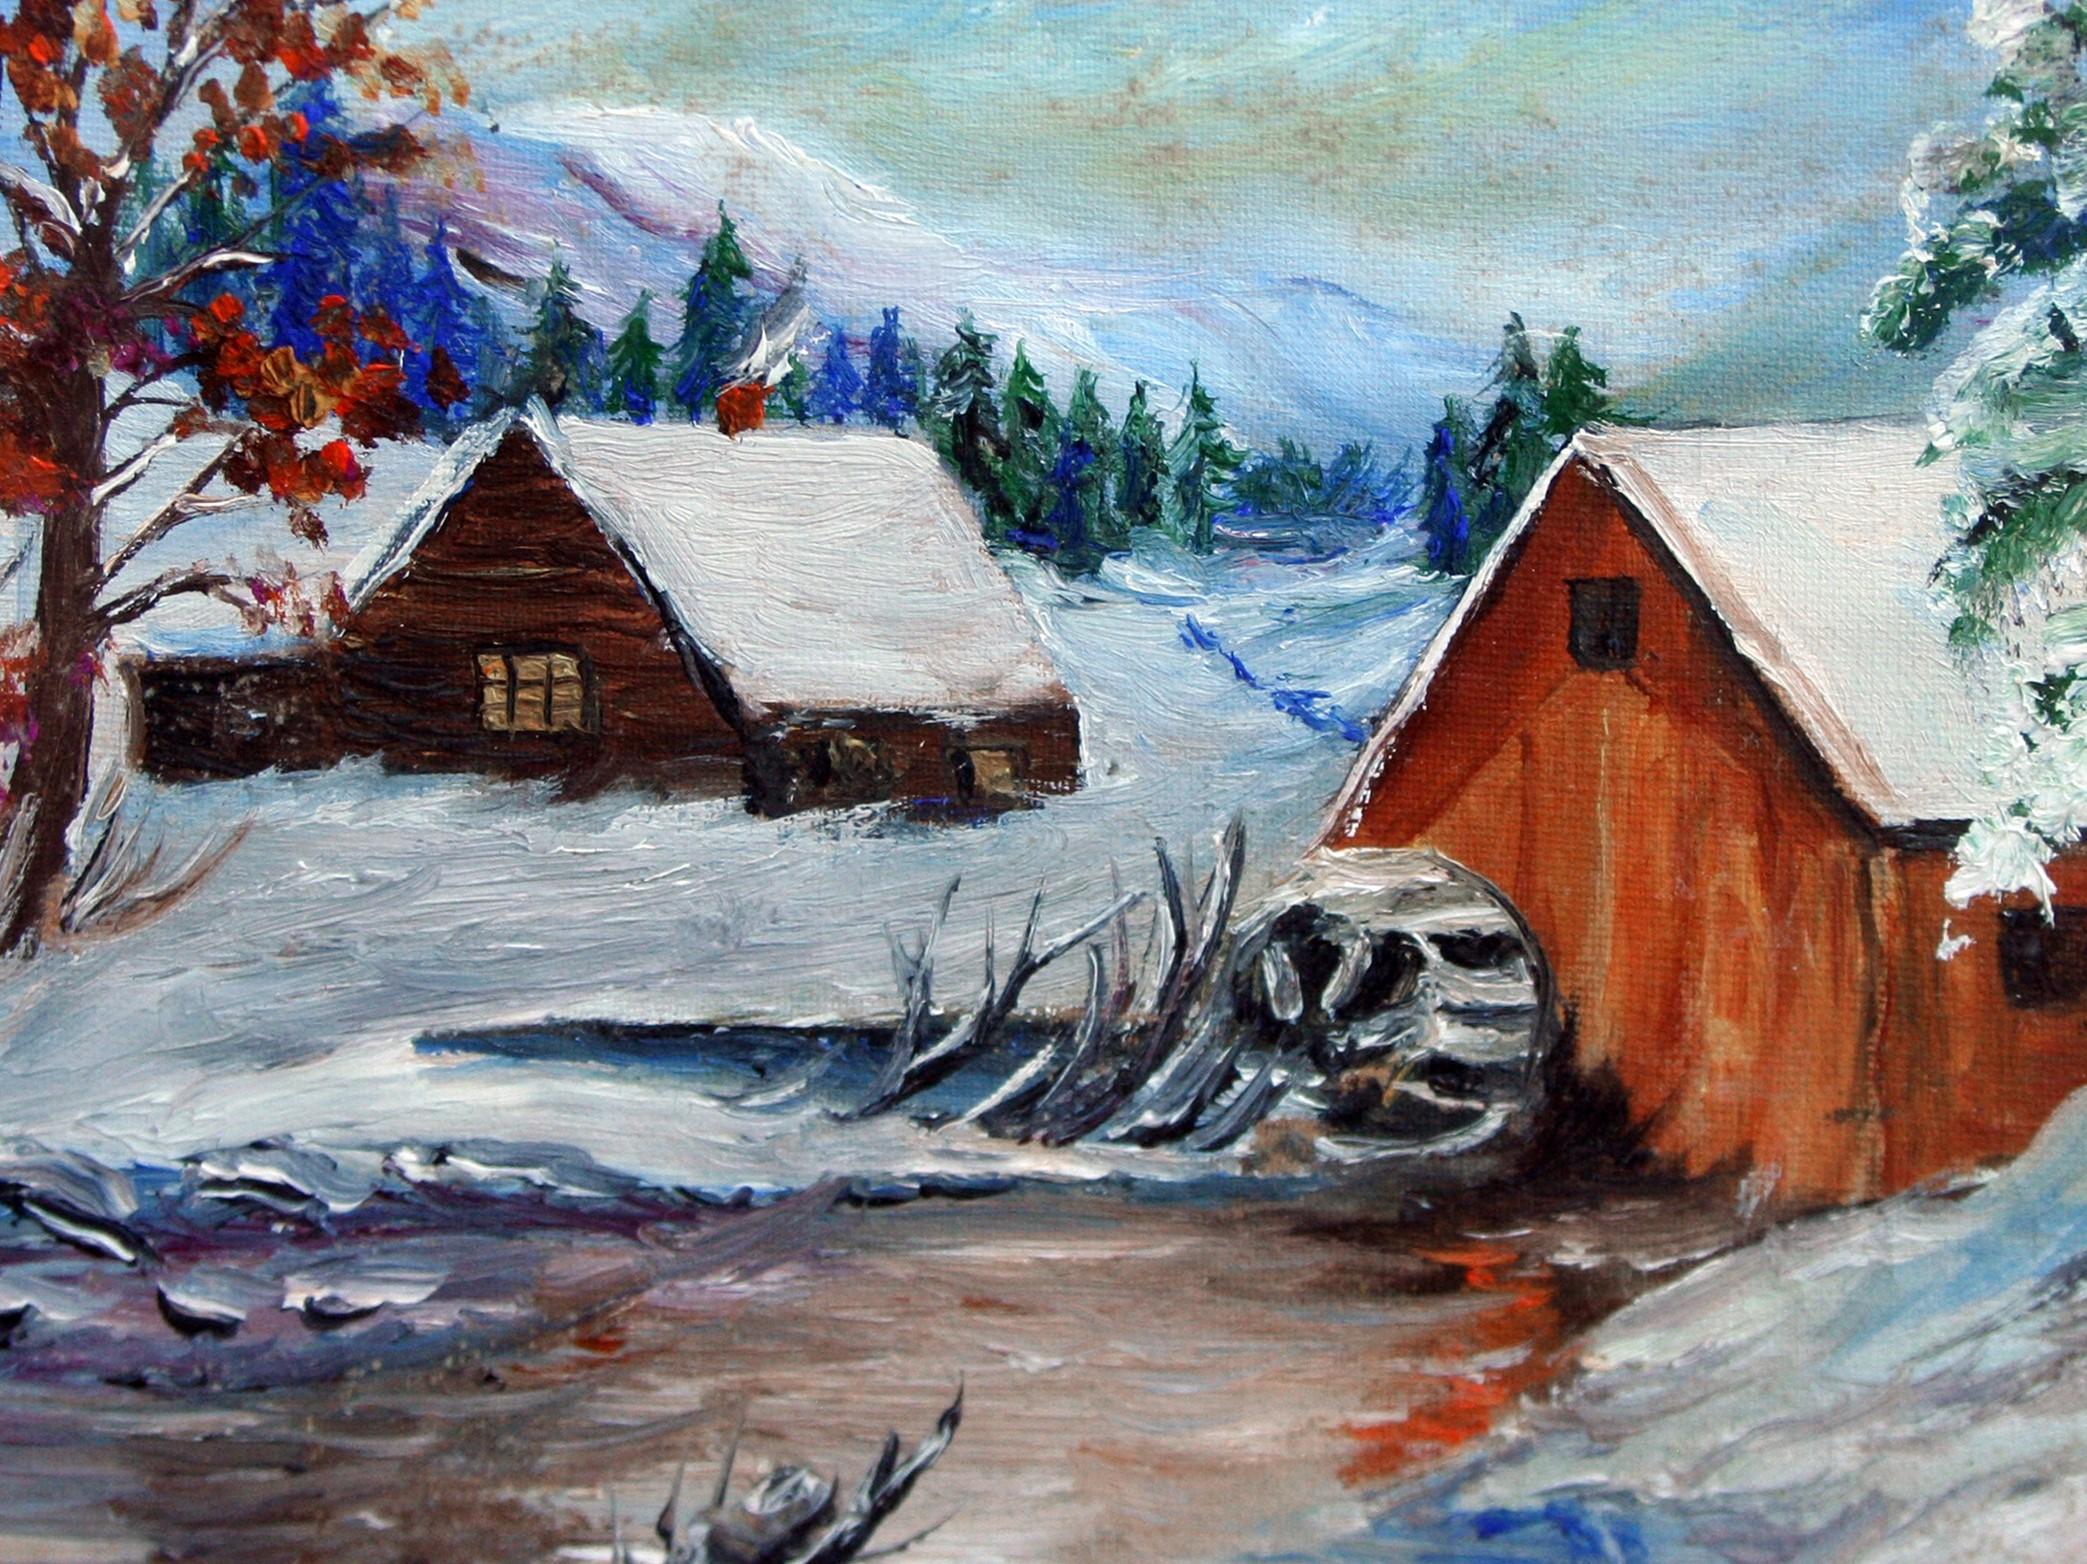 Grist Mill in the Snow - Winter Landscape - American Impressionist Painting by Unknown